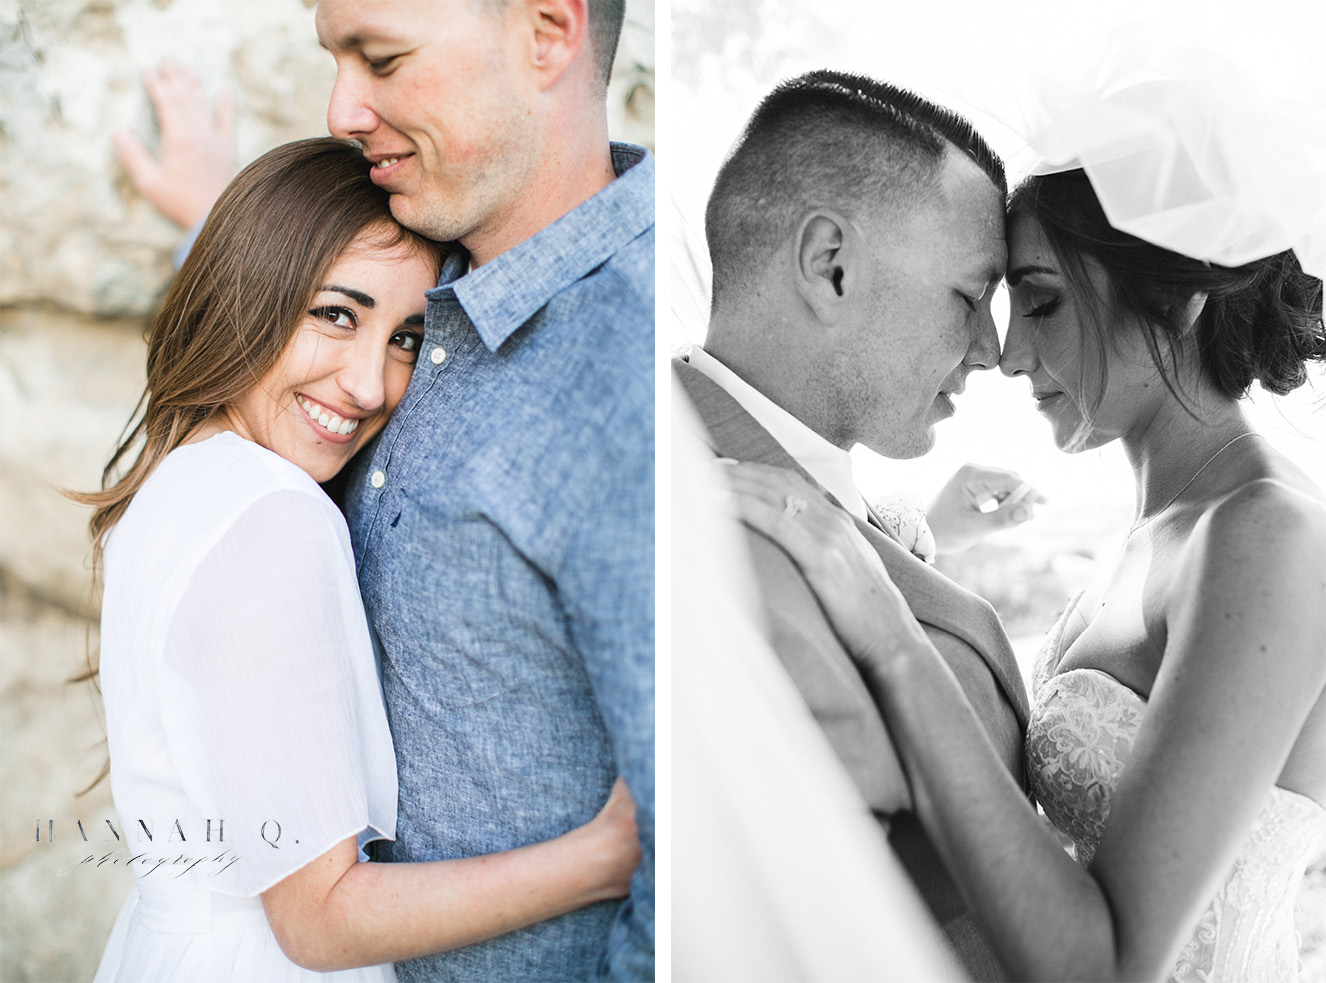 Another couple that chose me to take their engagement photos followed by their wedding photos. Best feeling ever!